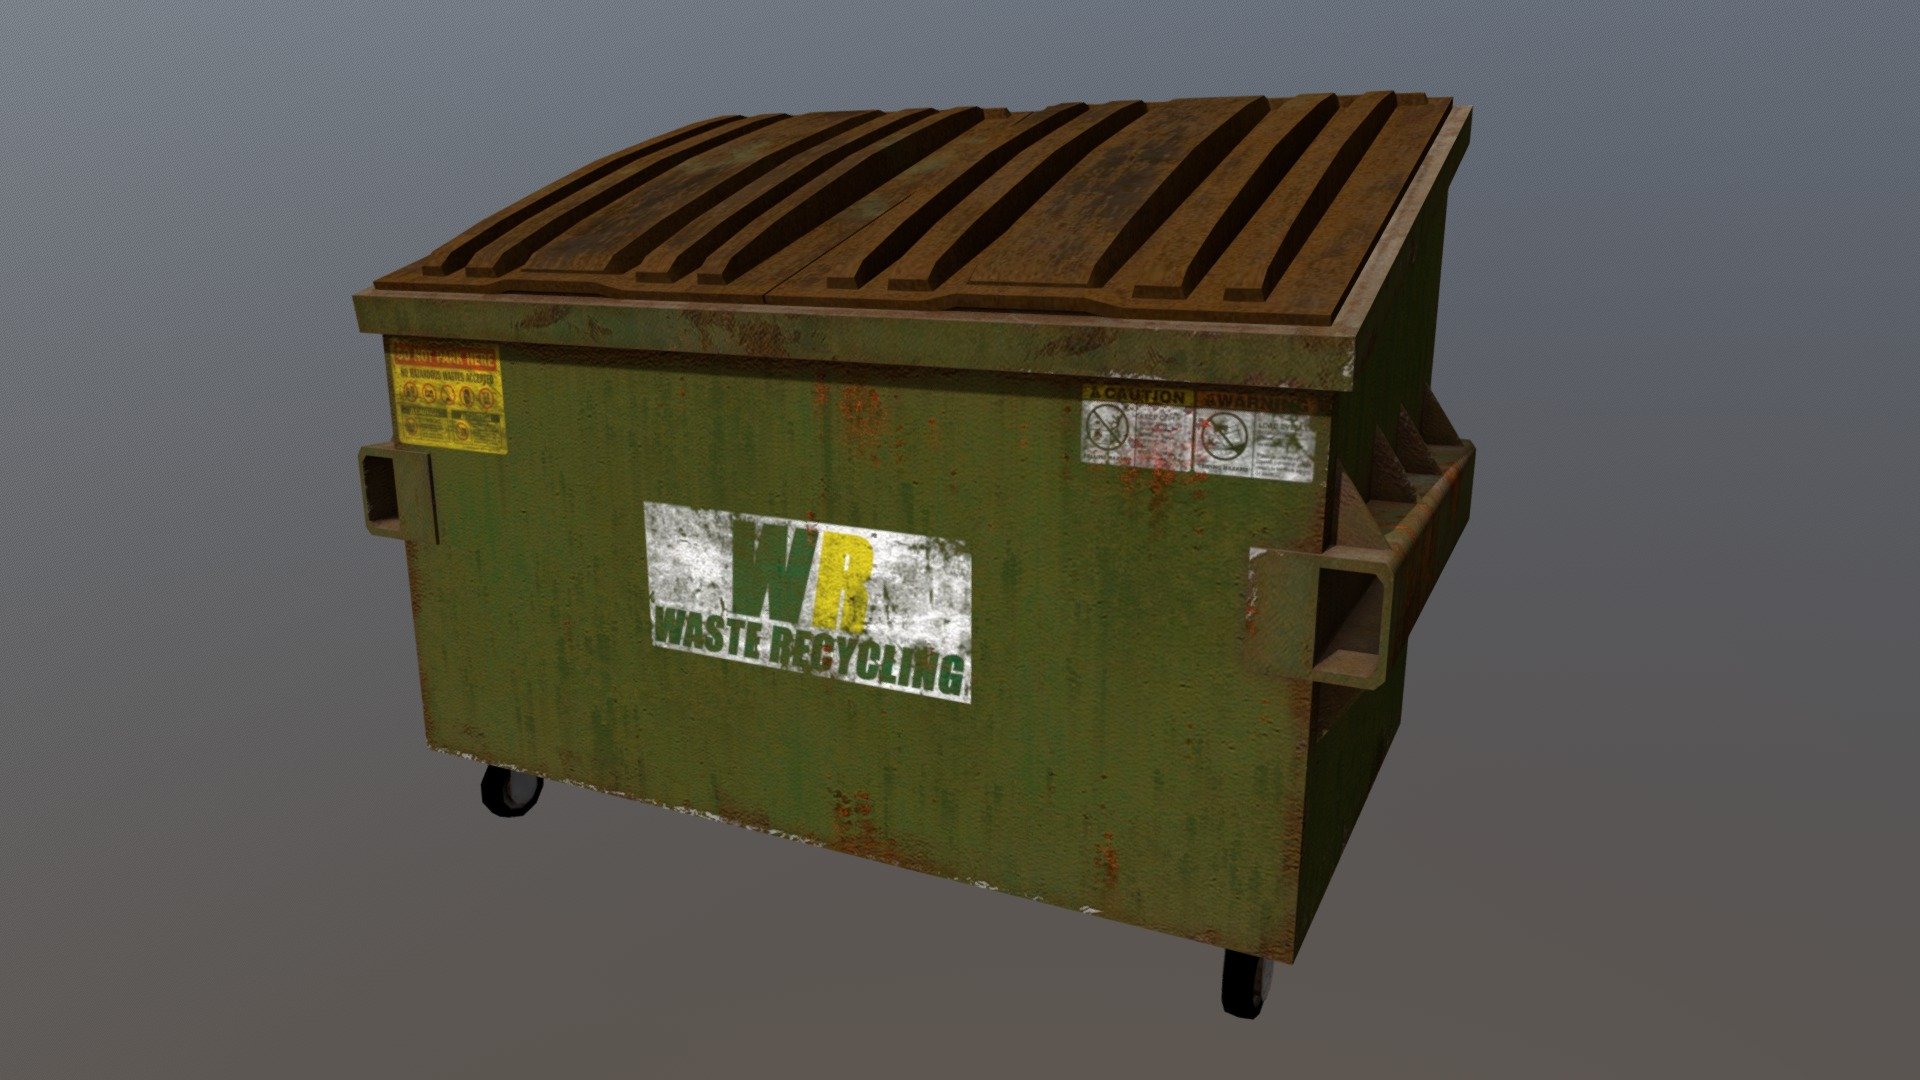 Here I have a dumpster and the overall idea for this is to have them look dingy and dirty, its been in use for years and is now just sitting, collecting dust 3d model